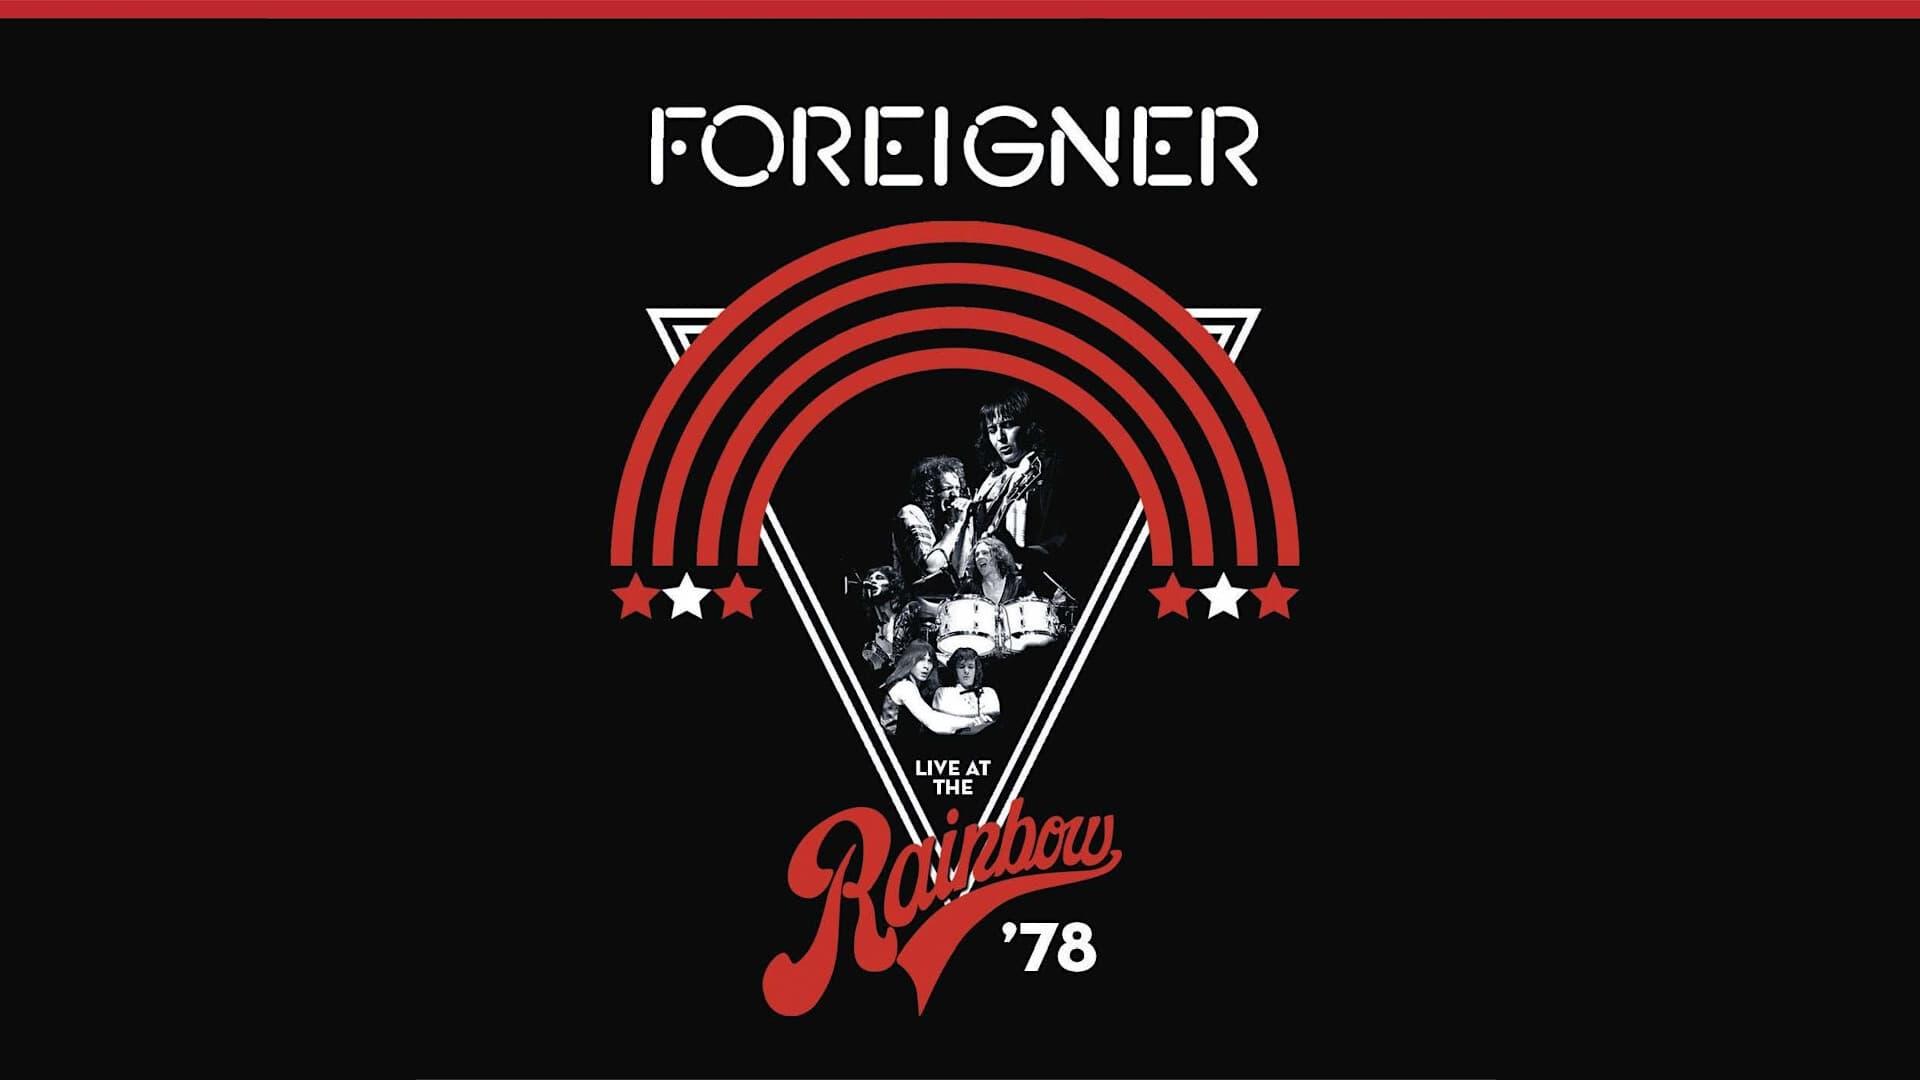 Foreigner - Live at the Rainbow '78 backdrop